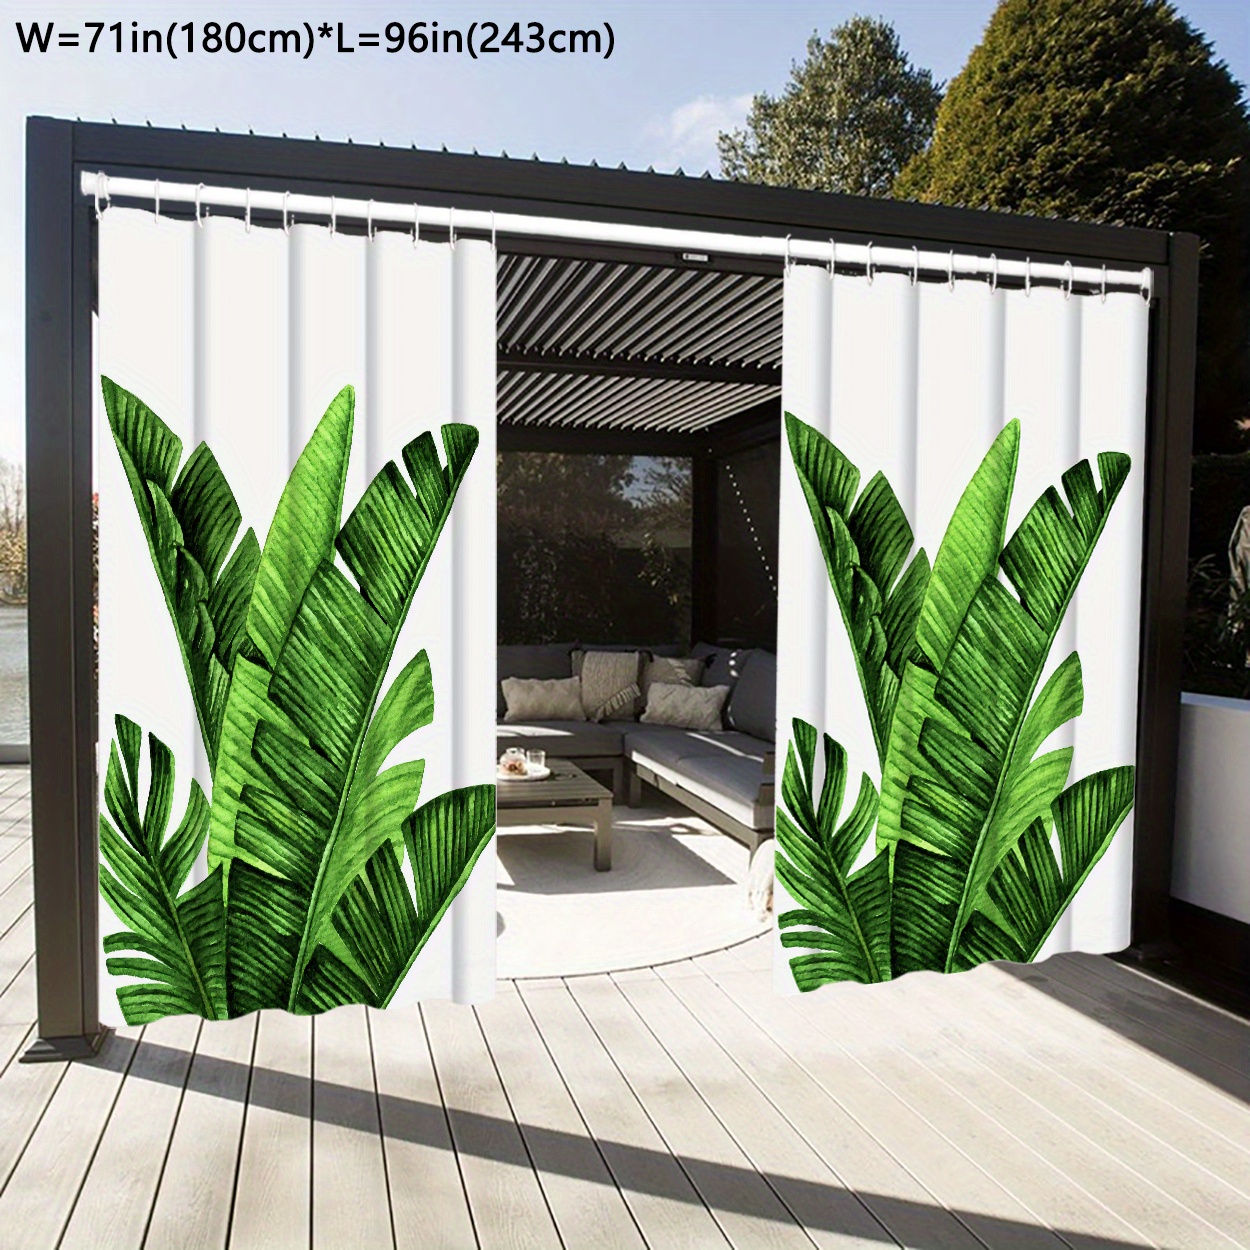 

1pc Waterproof Outdoor Curtain, Modern Simple Style Plant Leaf Pattern Curtain, Tropical Themed Yard Curtain, Indoor And Outdoor Patio Privacy Curtain, 71*96in